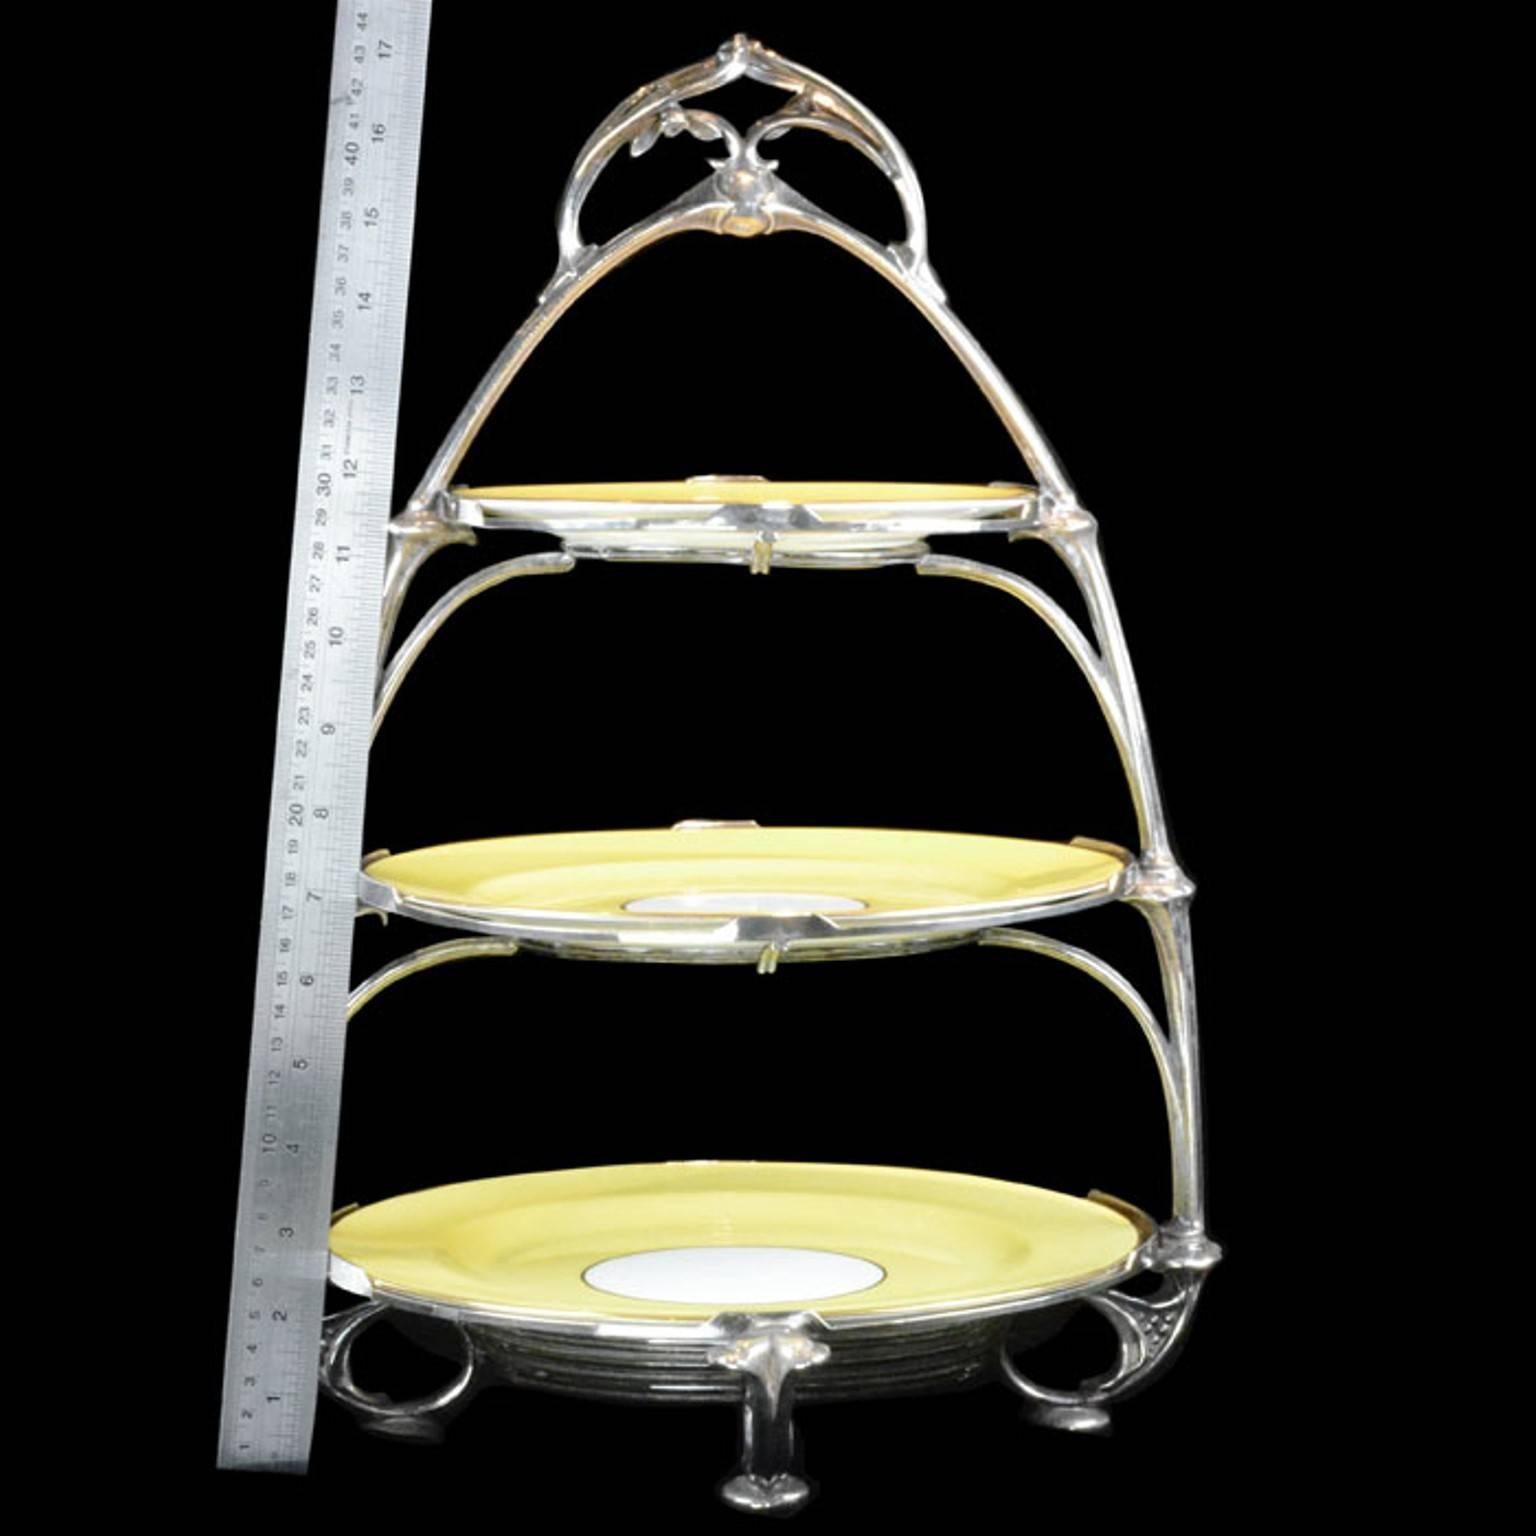 Women's or Men's Silver Three Tier Cake Stand By Omar Ramsden 1932